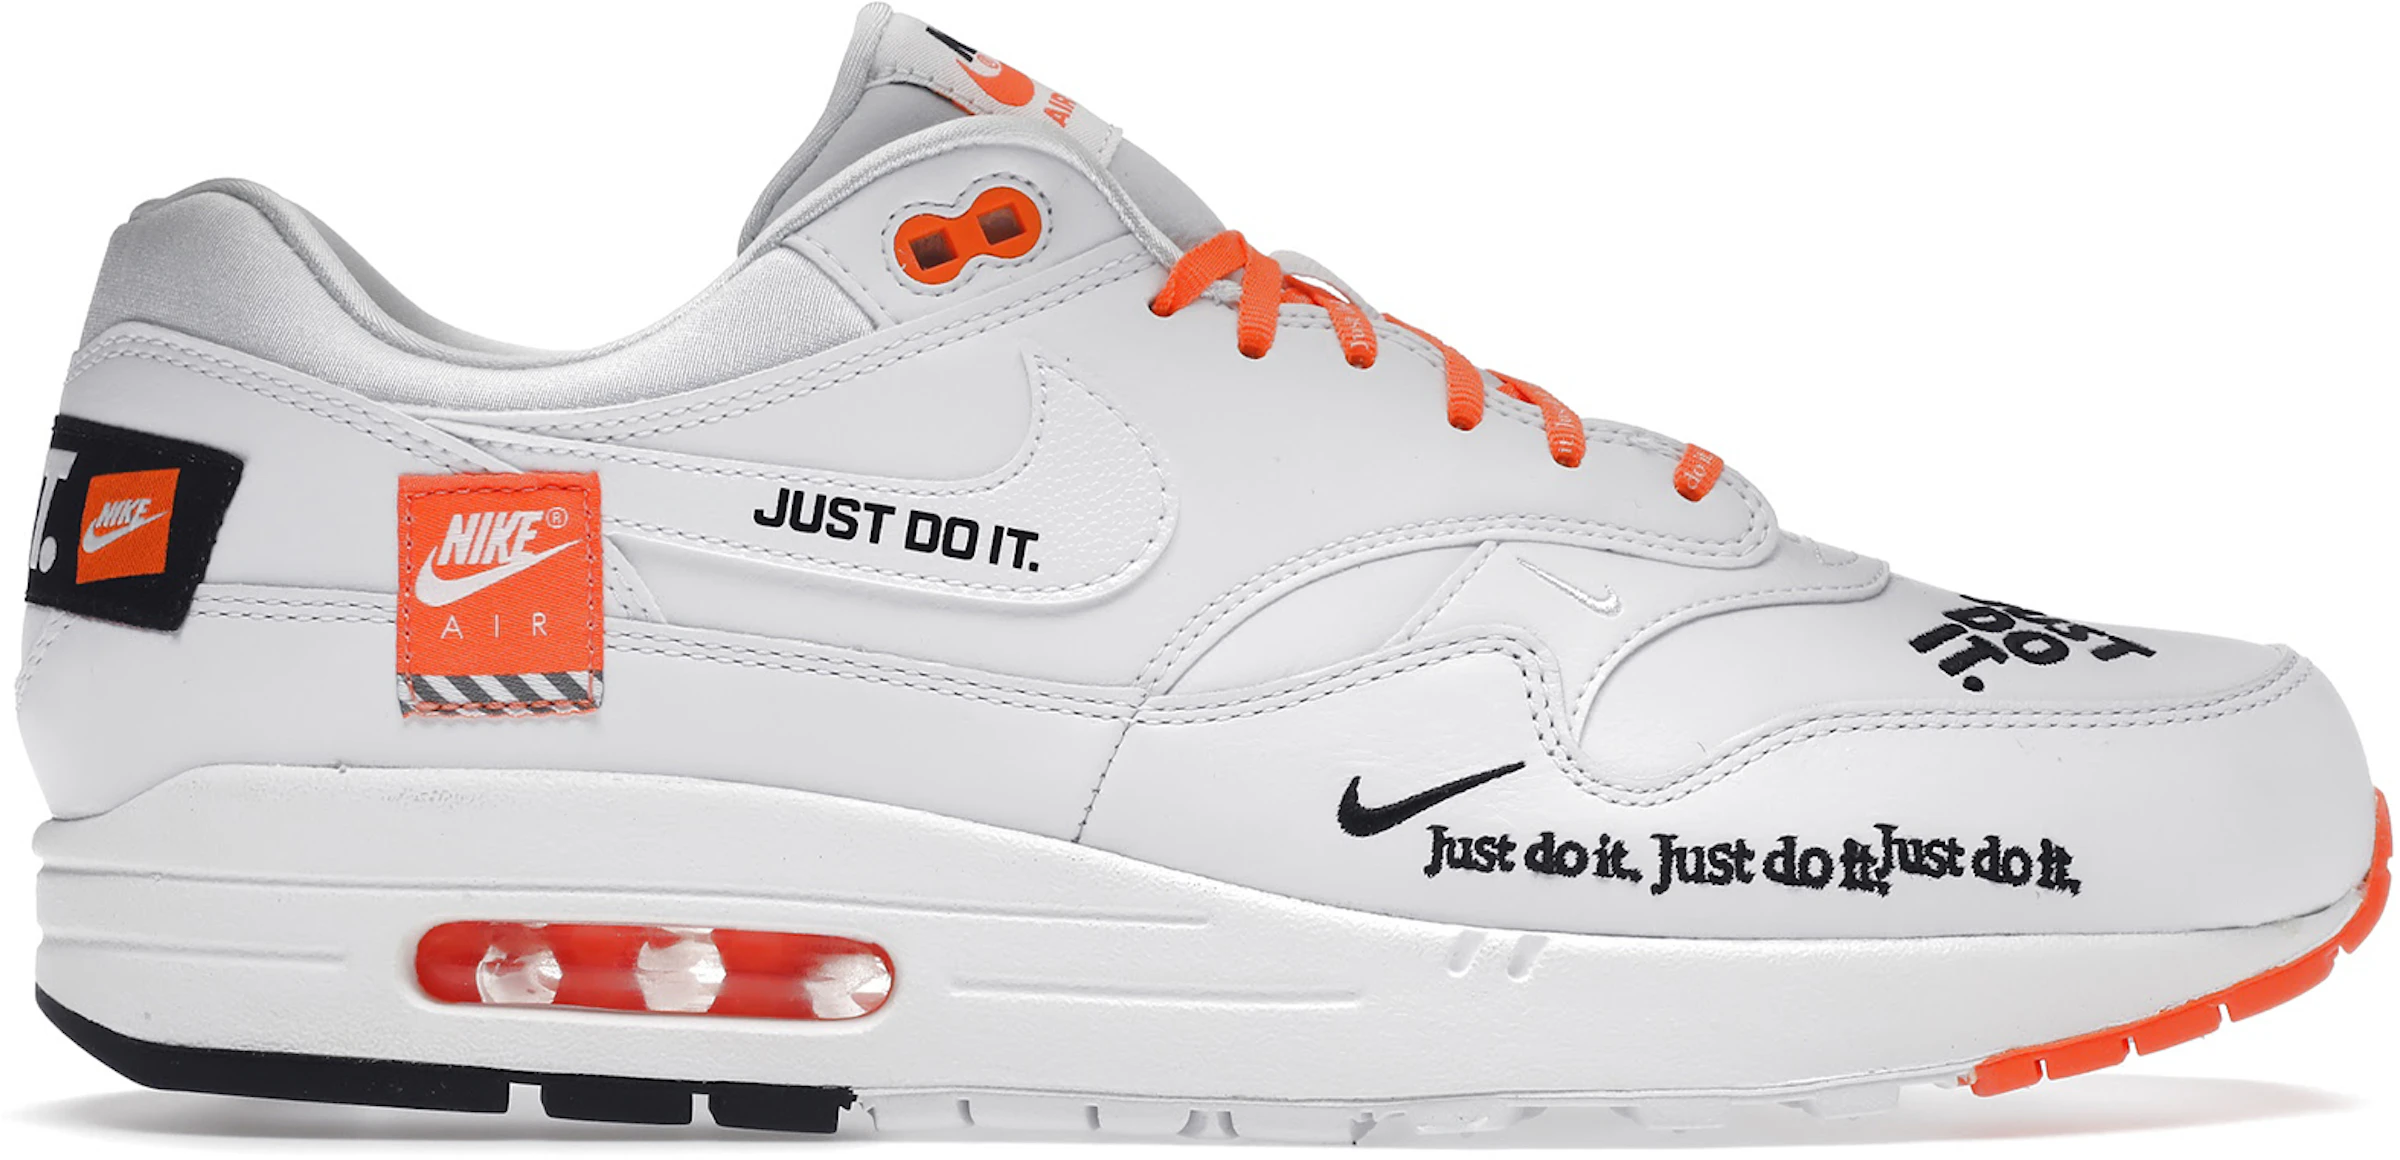 Nike 1 Just Do It Pack White - AO1021-100 -